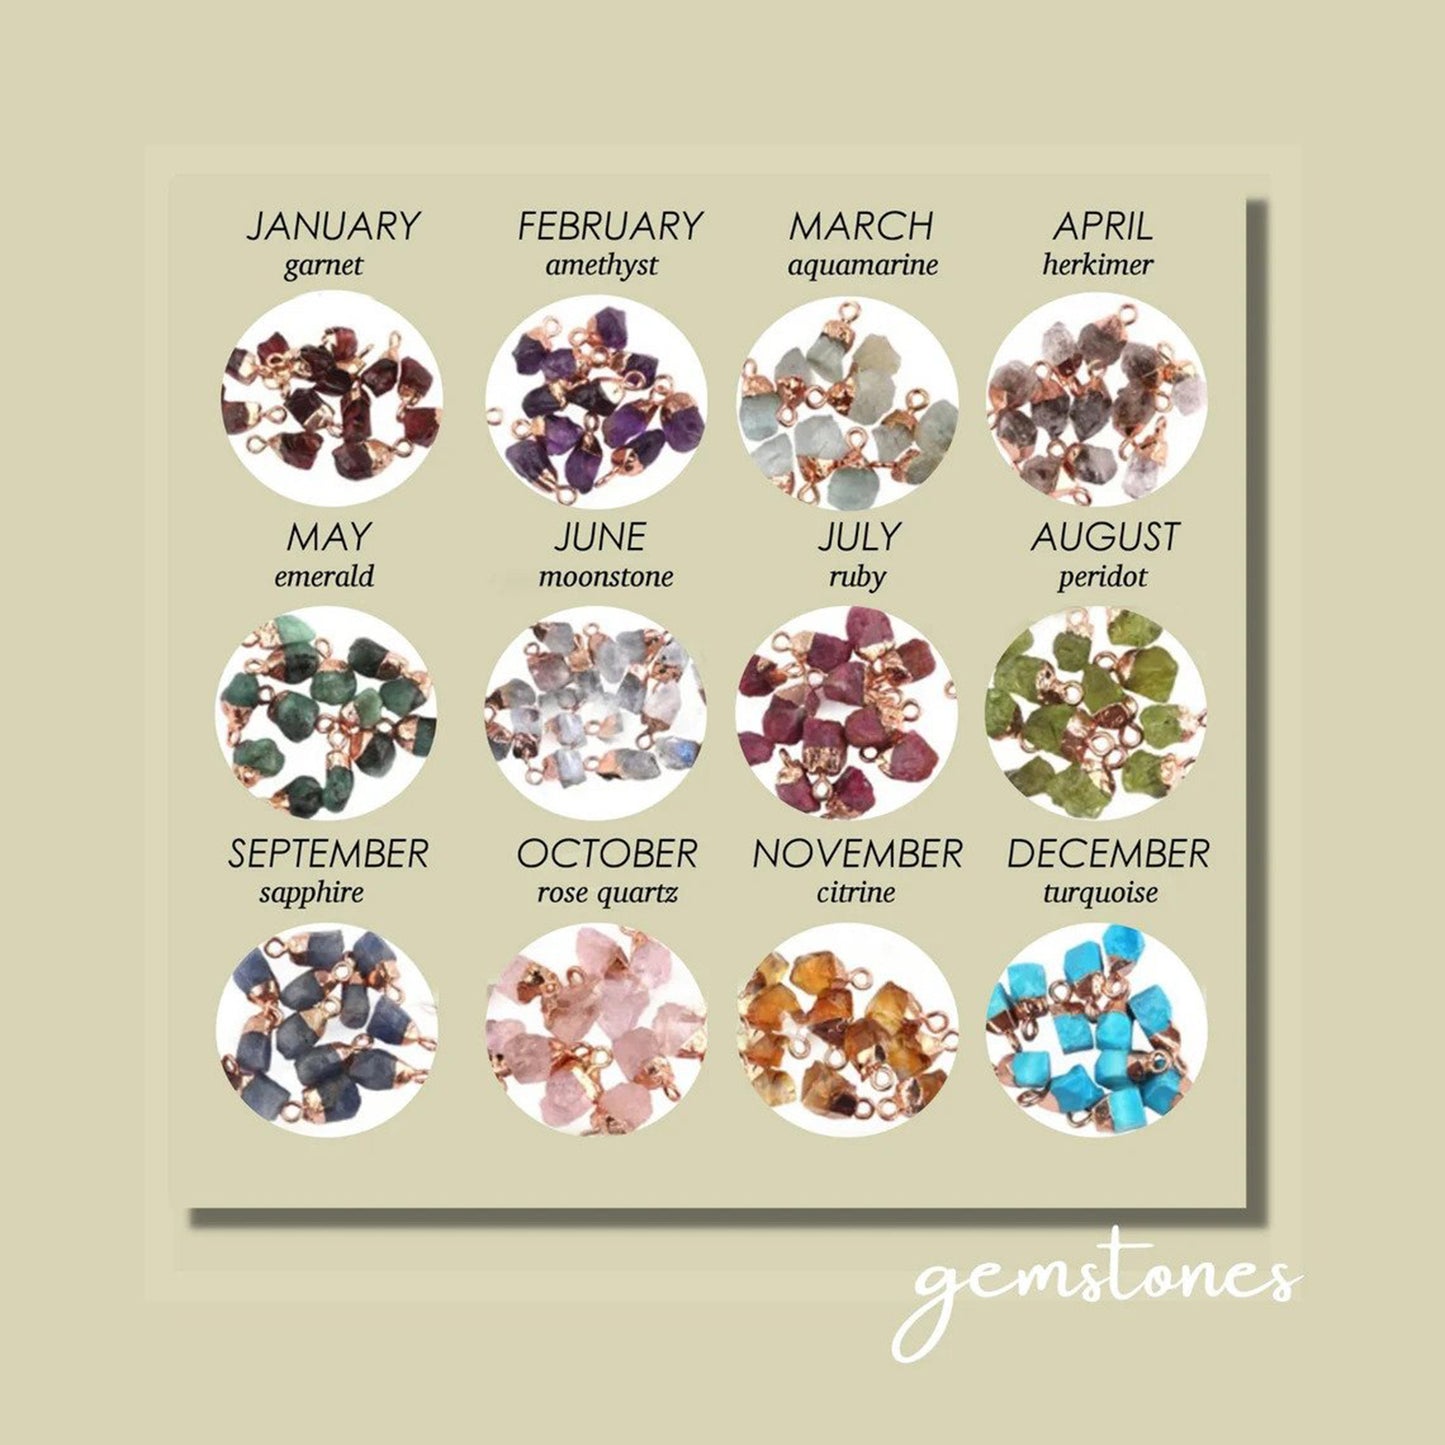 Birthstone gemstones options are shown listed with their month and crystal name by each gemstone pendant color.